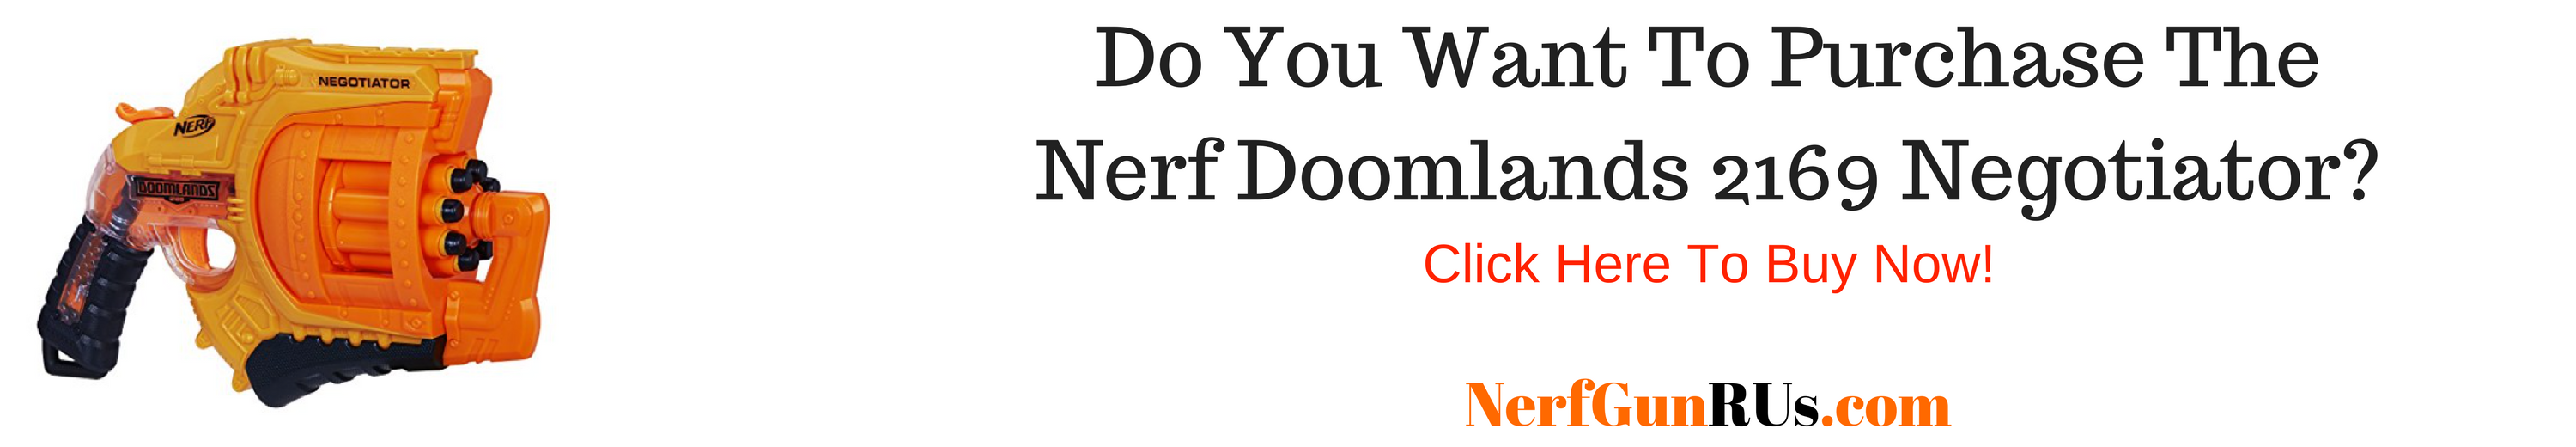 Do You Want To Purchase The Nerf Doomlands 2169 Negotiator | NerfGunRUs.com